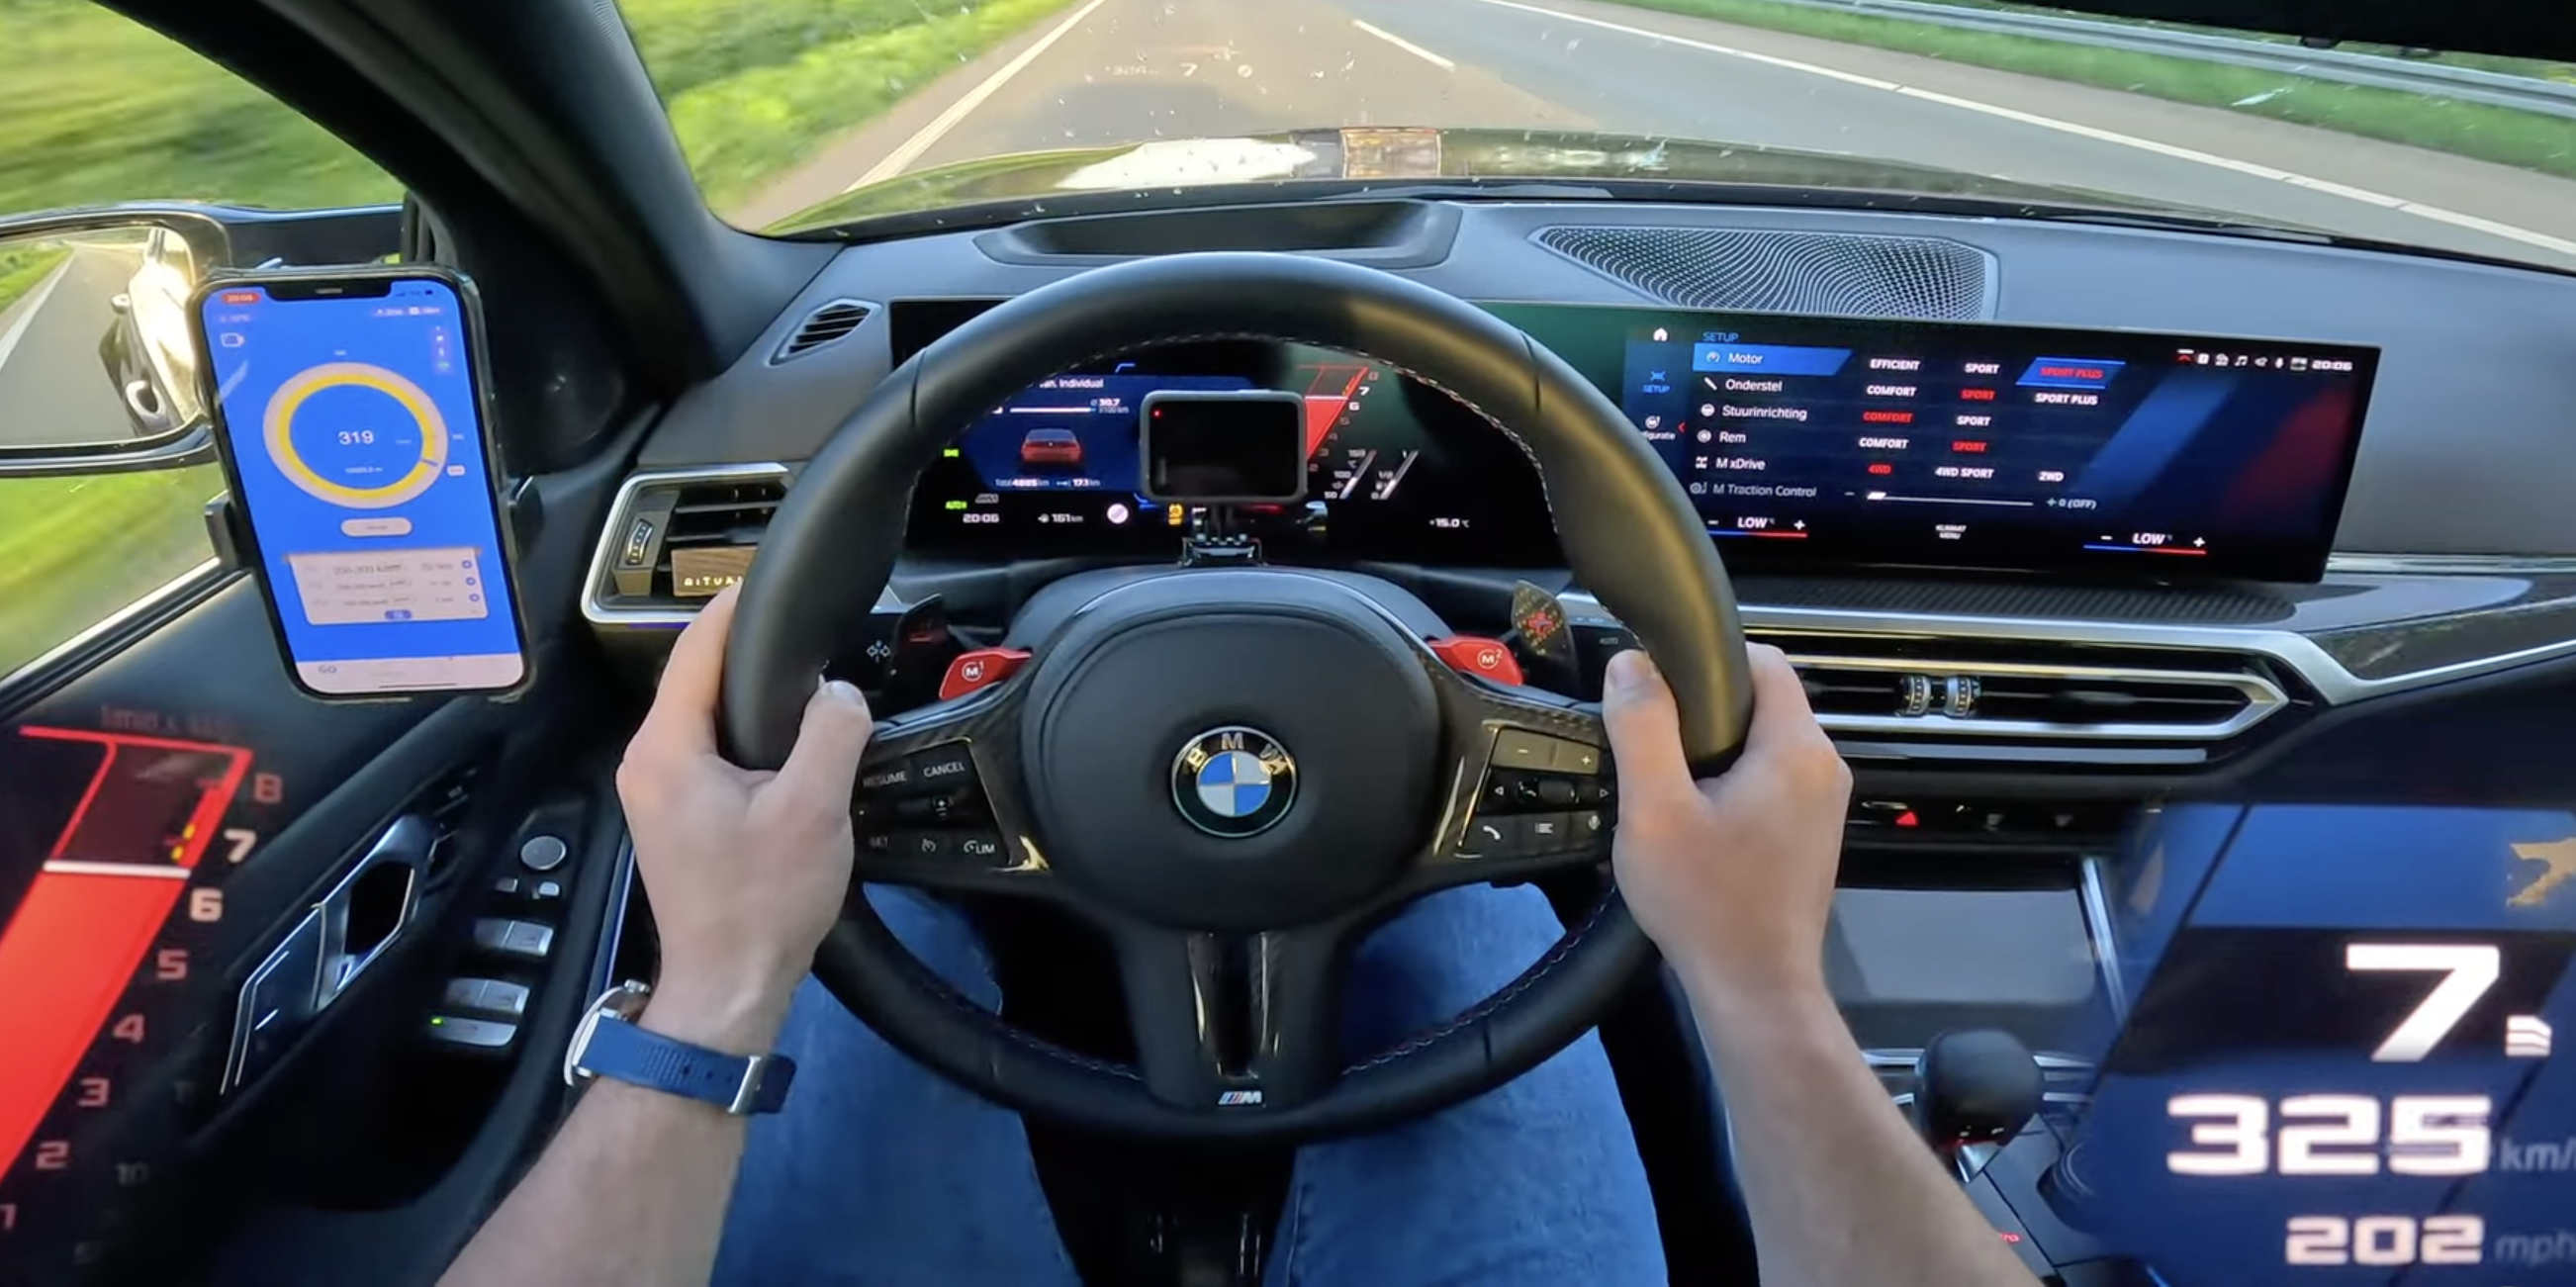 Watch This 750-HP BMW M3 Hit 204 MPH on the Autobahn